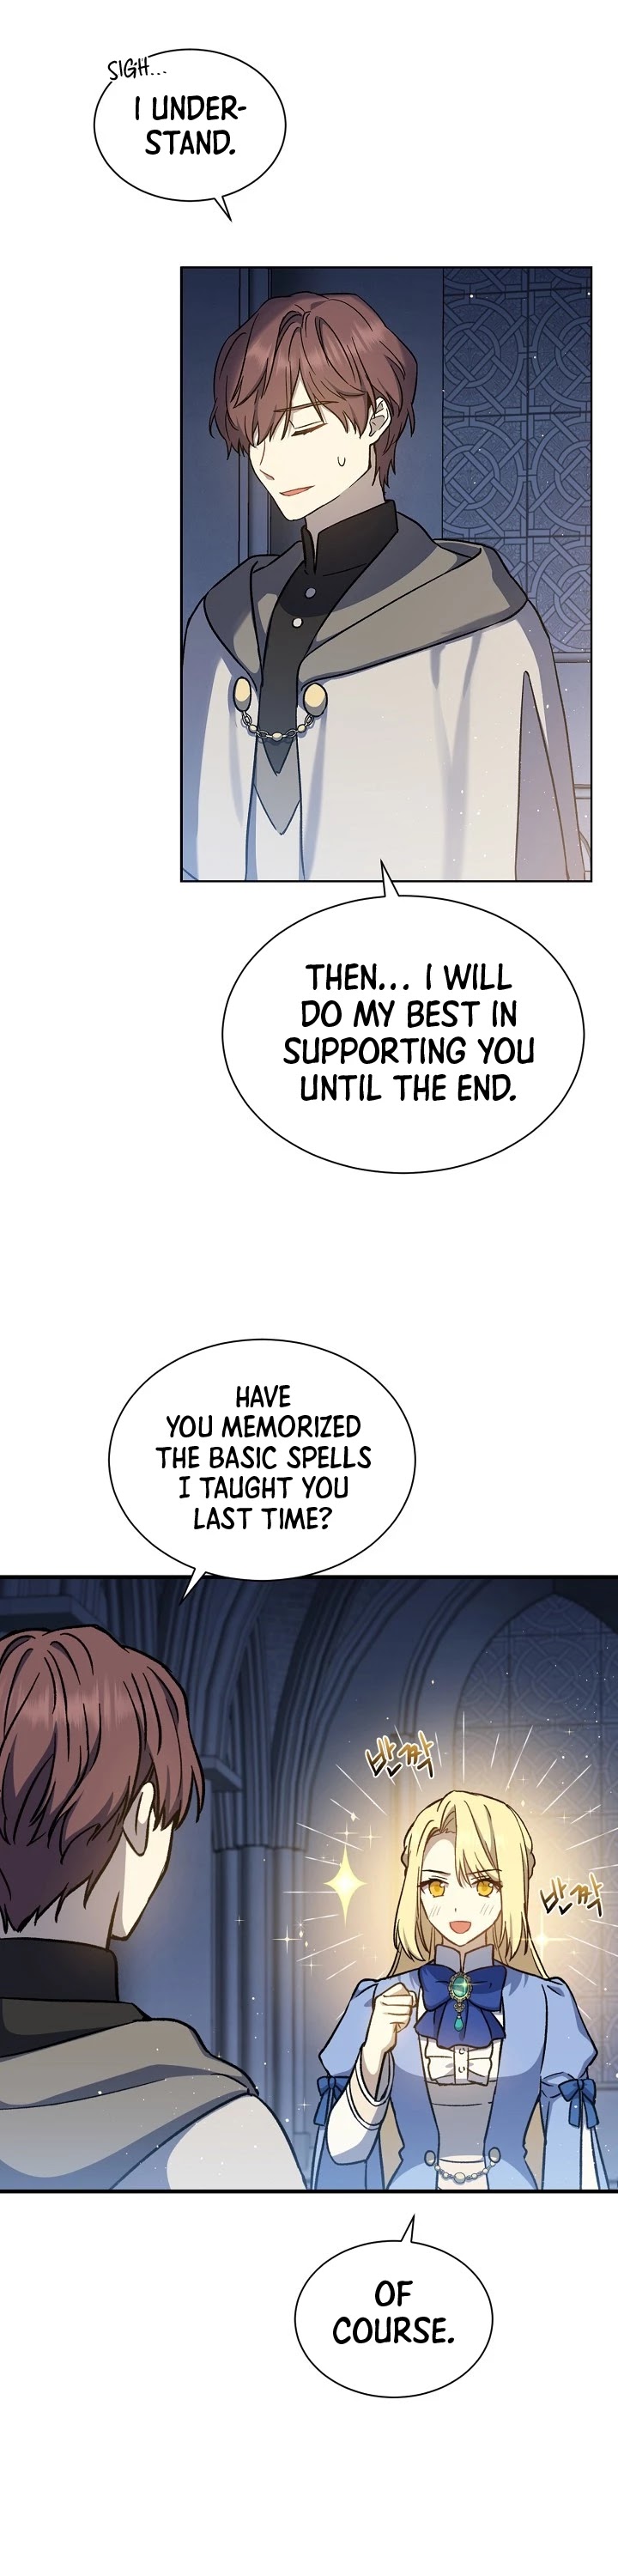 Return of the 8th class Magician chapter 16